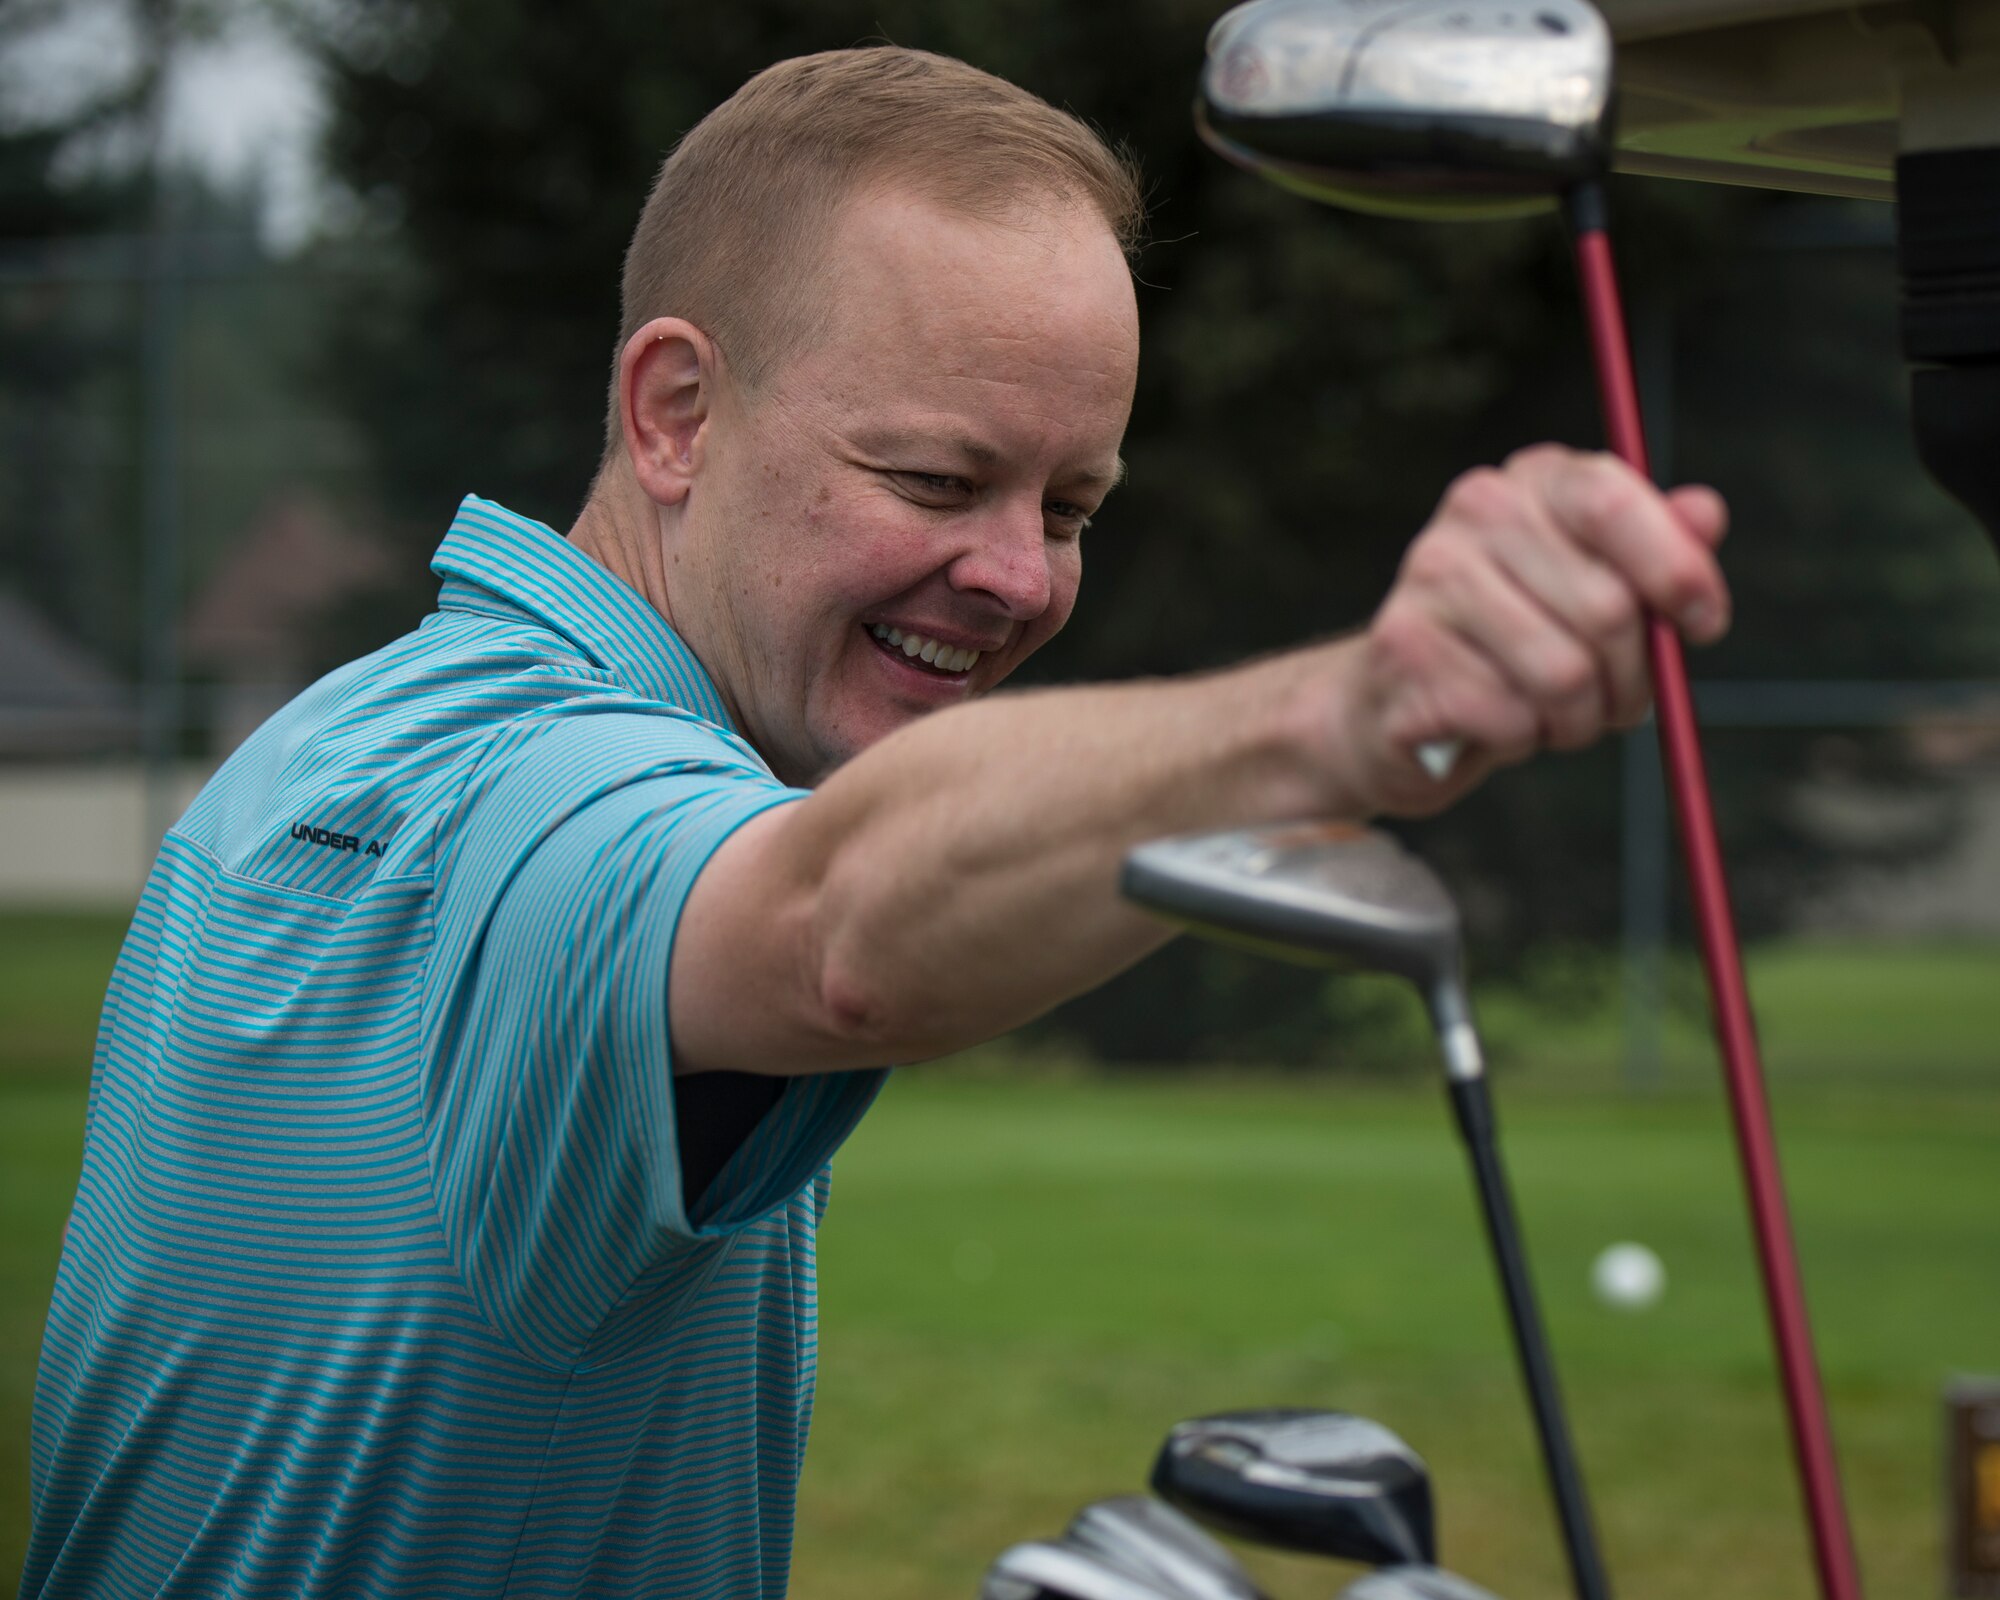 U.S. Air Force Col. Derek Salmi, 92nd Air Refueling Wing commander, selects a golf club during the 24th Annual Operation Warmheart Golf Tournament at Wandermere Golf Course in Spokane, Washington, July 27, 2018. Operation Warm Heart is a program offered by first sergeants to assist military members and their families during the holidays and throughout the year, specifically to purchase food items and aid in emergencies during difficult times. (U.S. Air Force photo/ Airman 1st Class Whitney Laine)